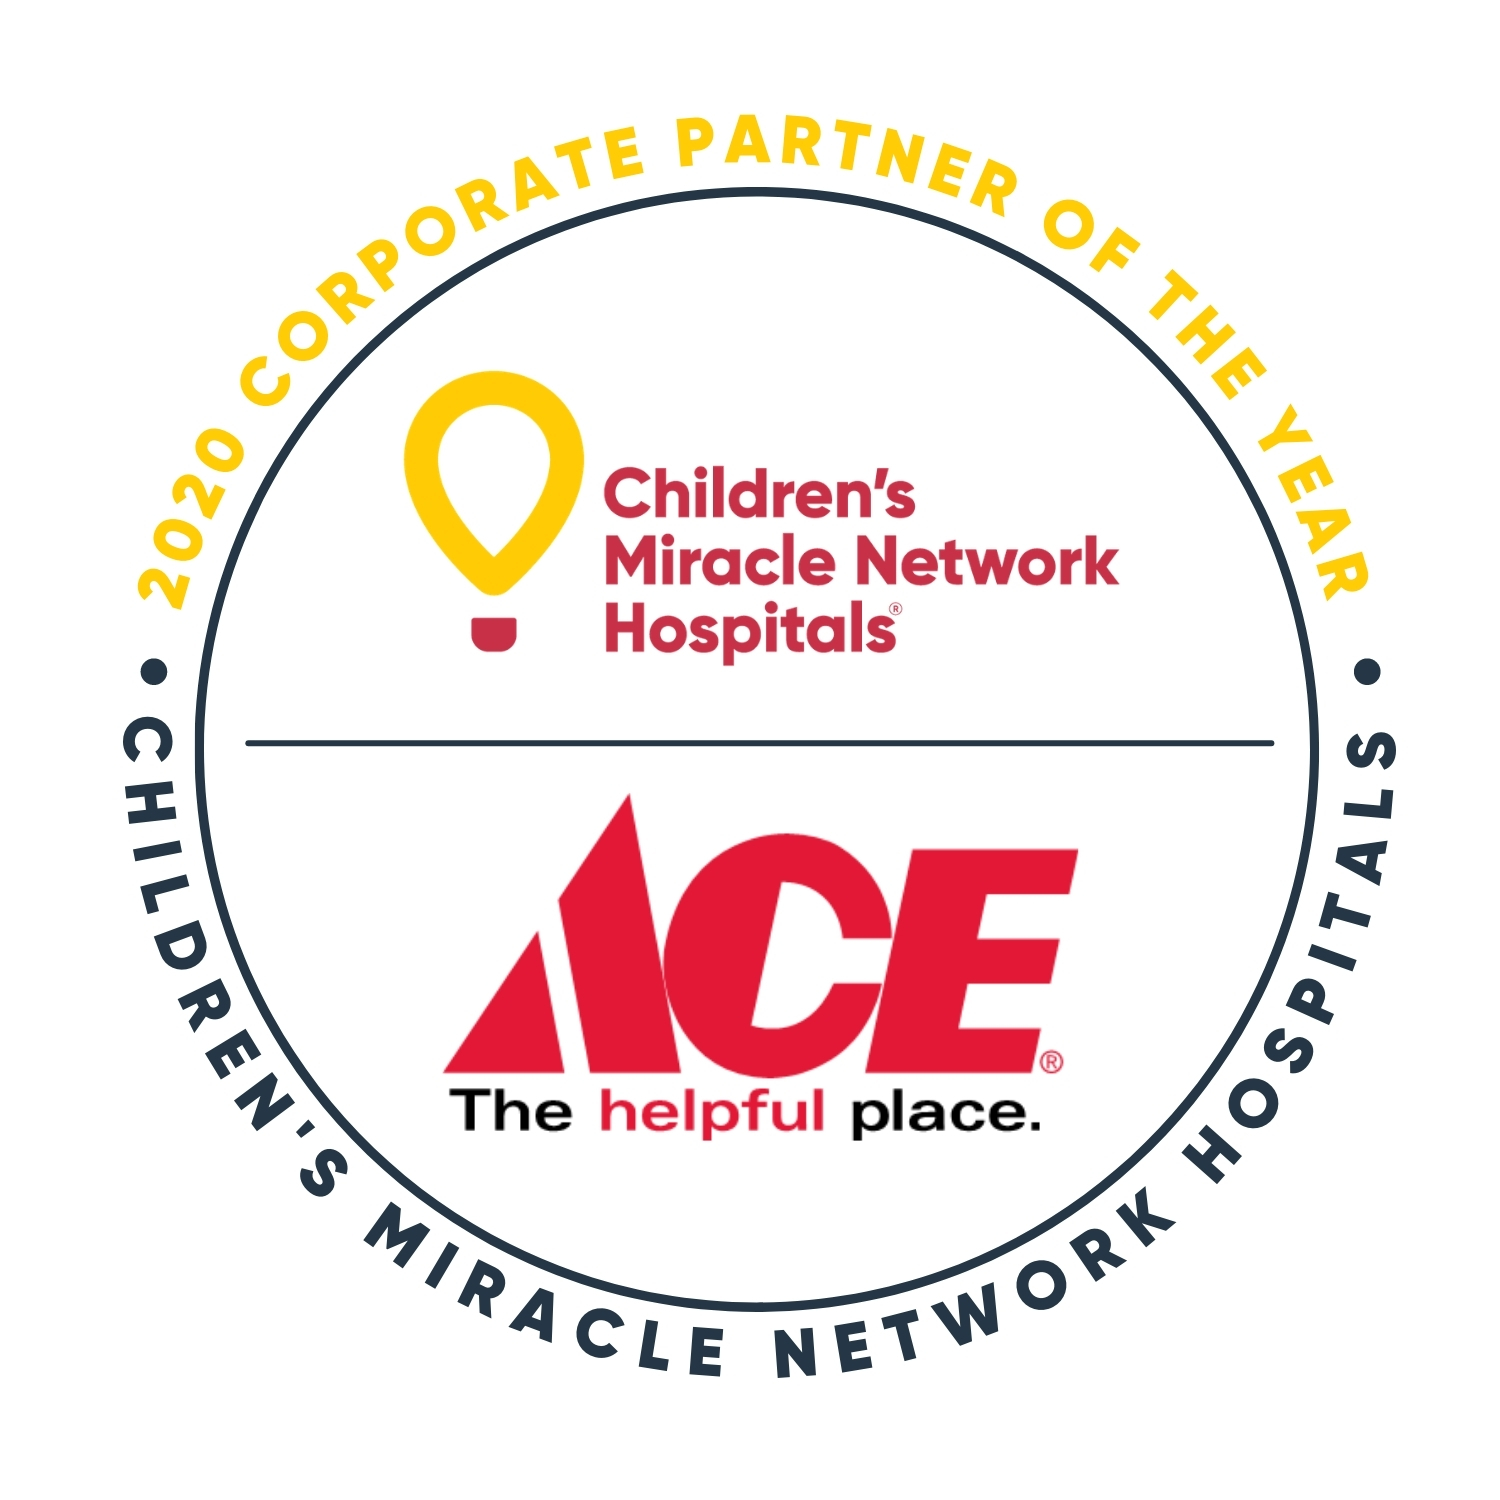 A Proud Partner of Children's Miracle Network Hospitals